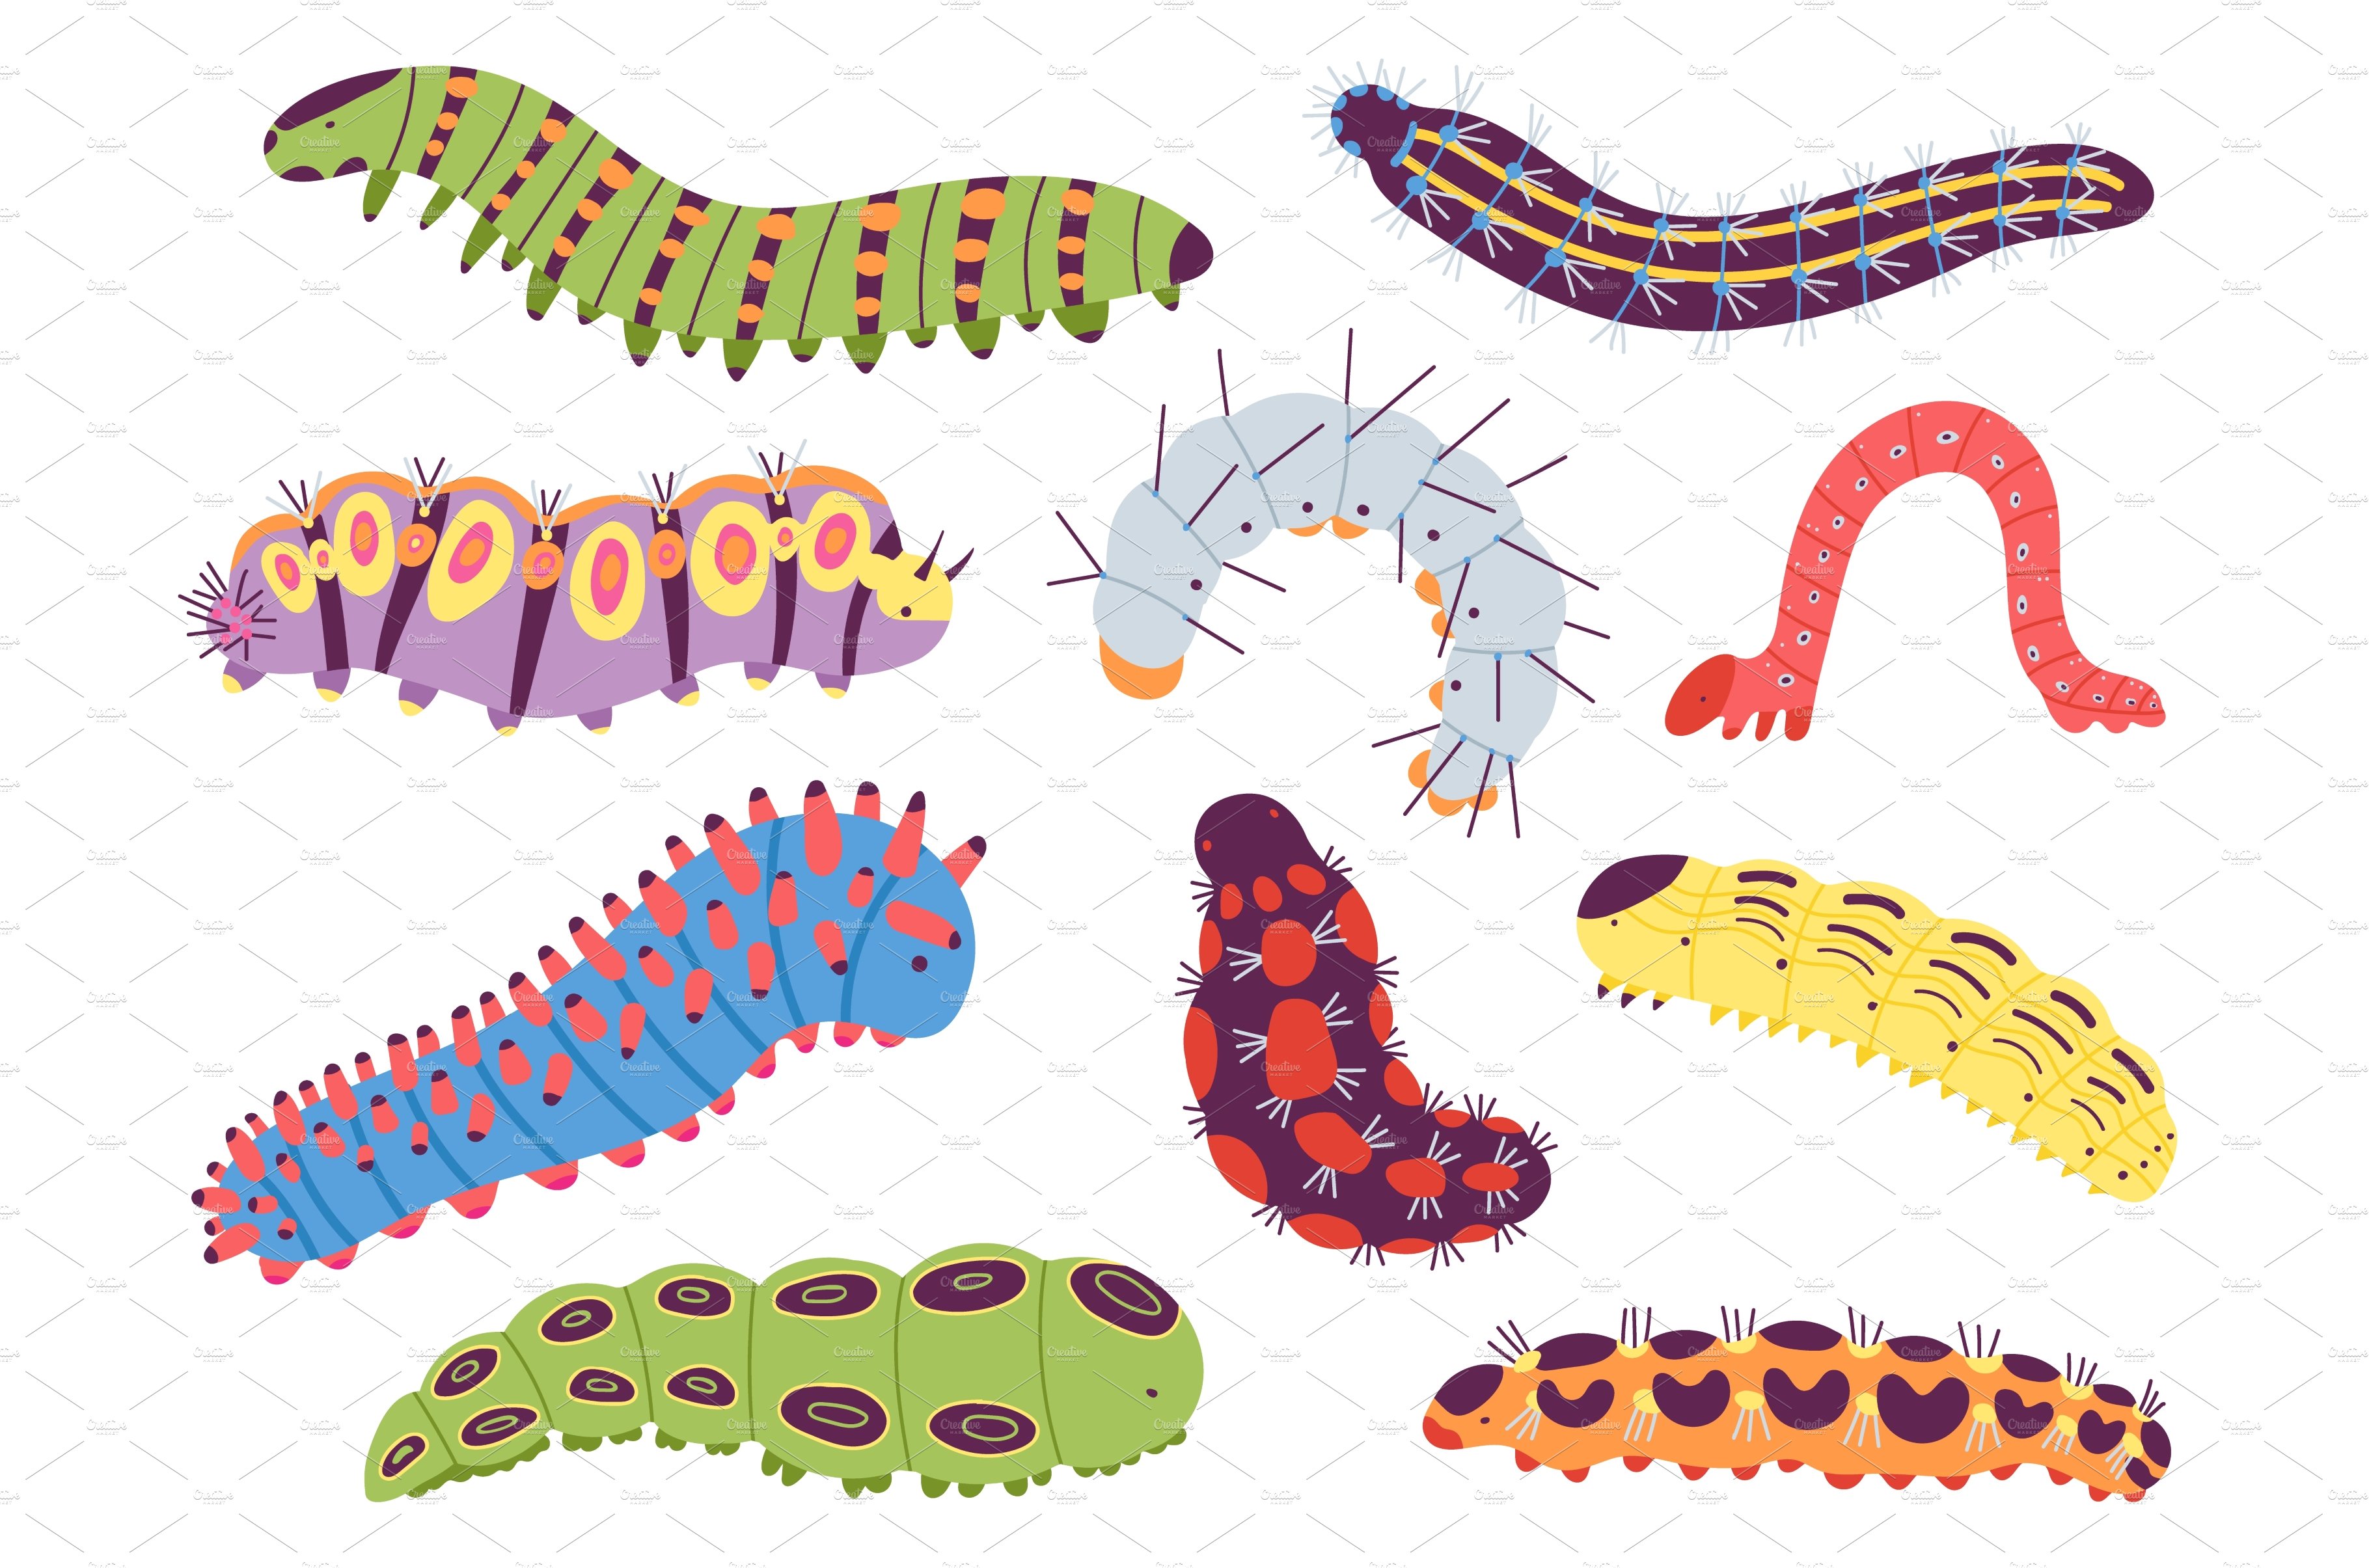 Cute Caterpillar Cartoon Vector Illustration Isolated On White Background.  Royalty Free SVG, Cliparts, Vectors, and Stock Illustration. Image 95411202.